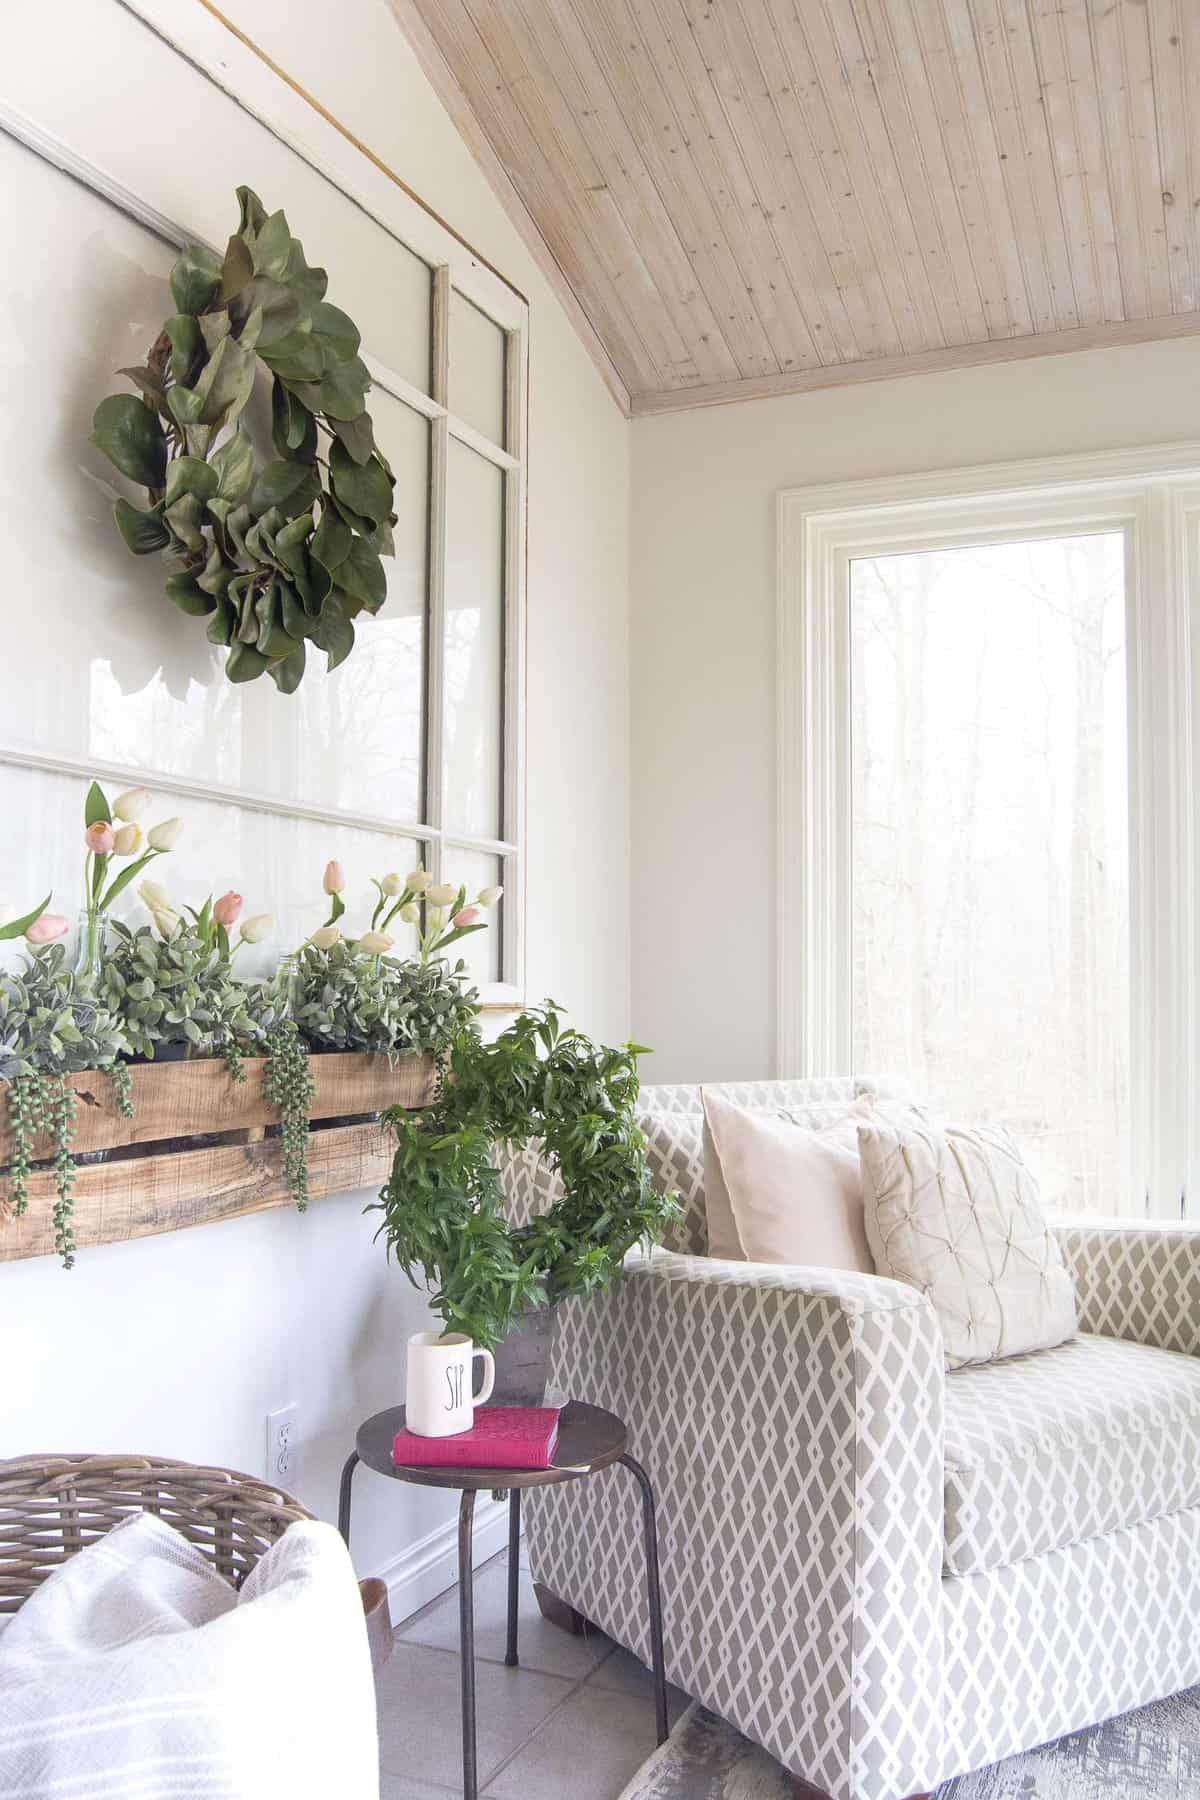 Have you ever needed to carve an office into another space? Today I'm sharing how I made a sunroom office into a dual purpose paradise. A little sun and nature mixed with a little work and modern convenience. Head to the blog for all the details www.graceinmyspace.com.